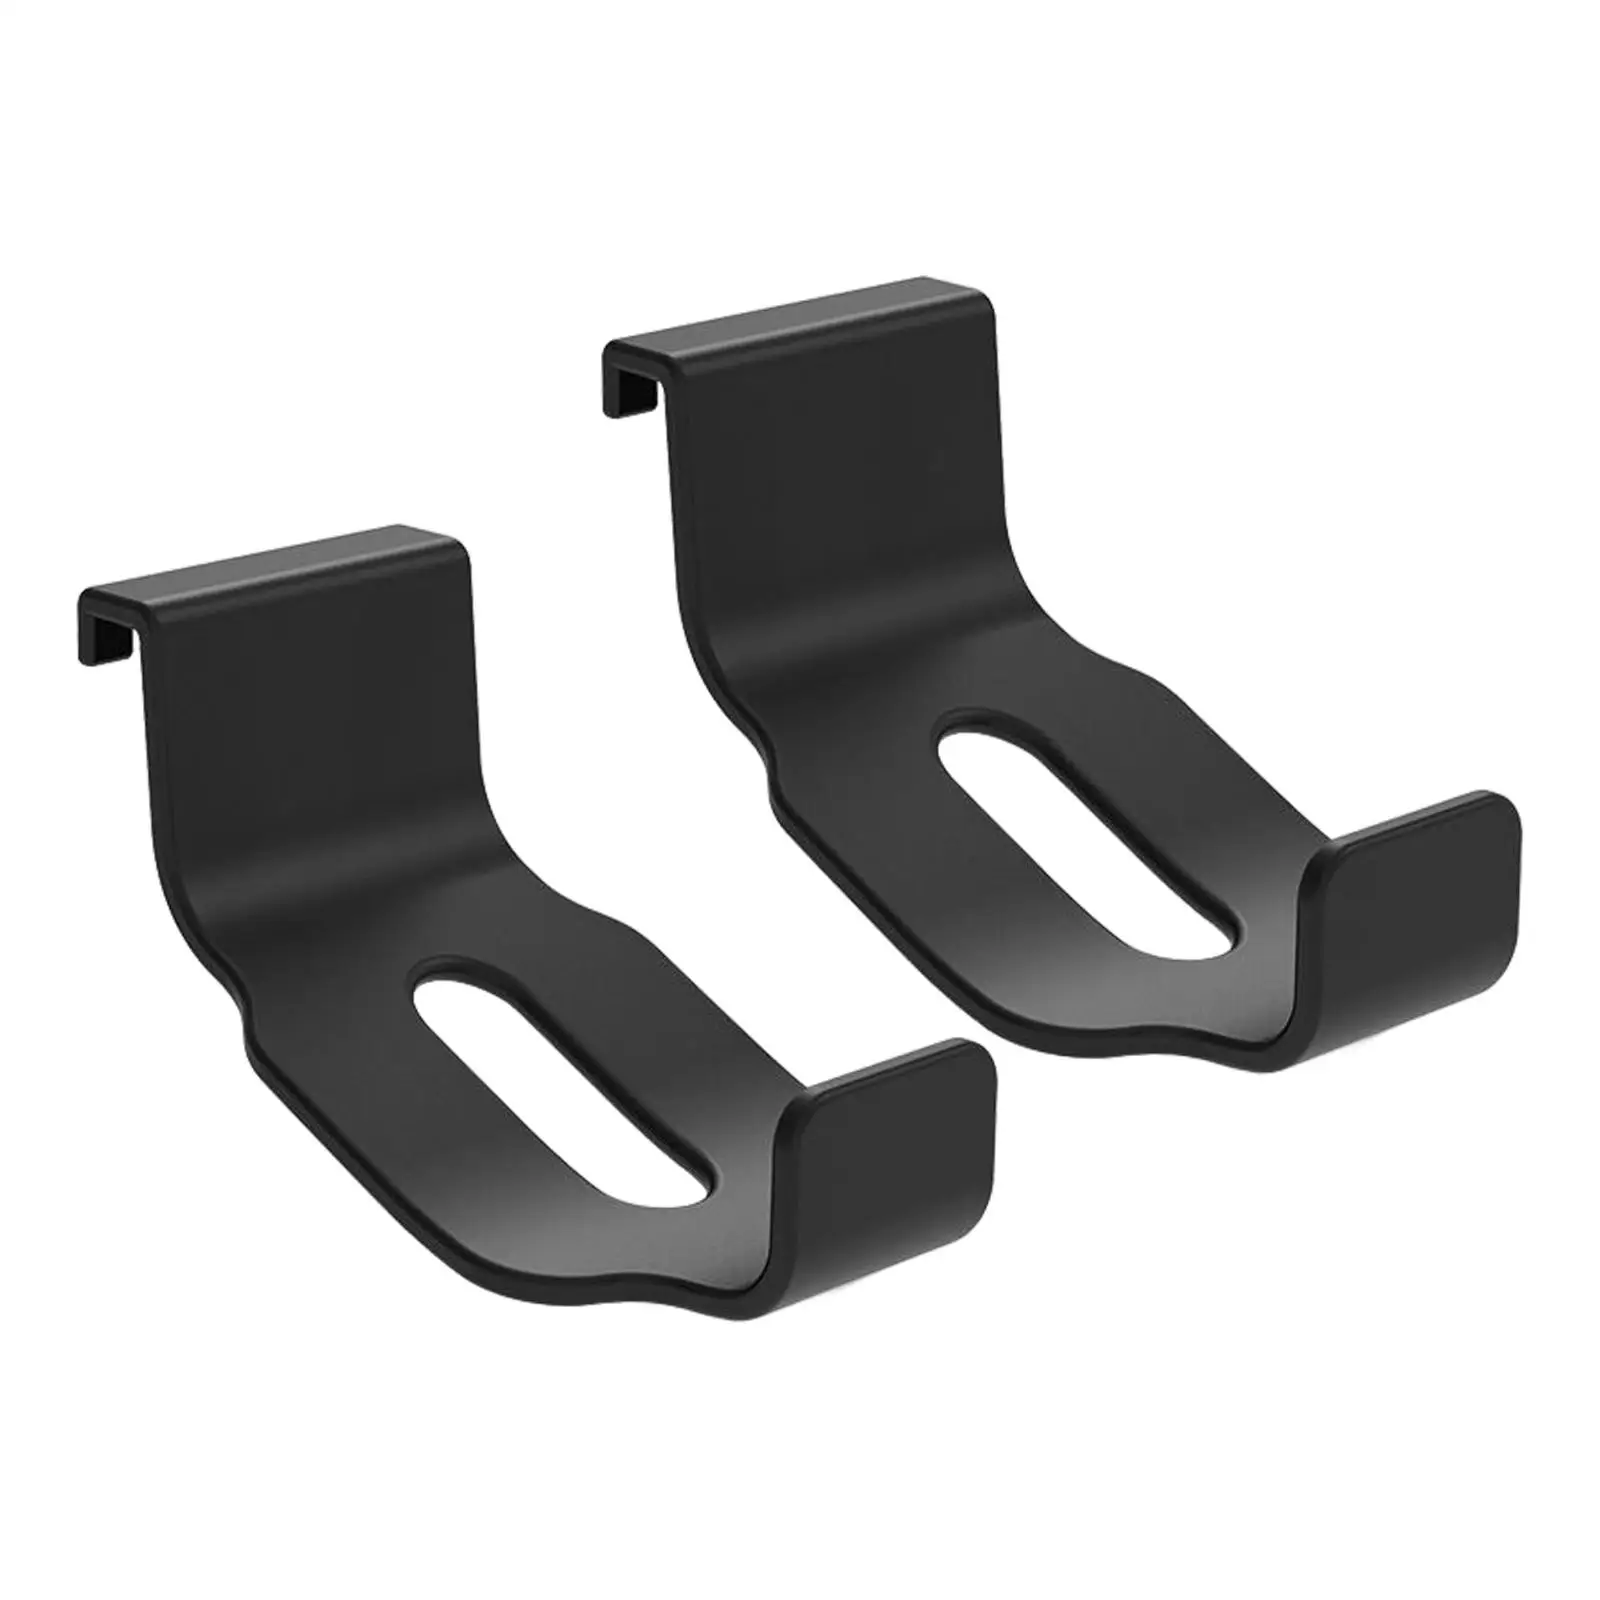 2 Pieces Headset and Controller Stand Headphone Hanger Holder Controller Stand Mount for Series x